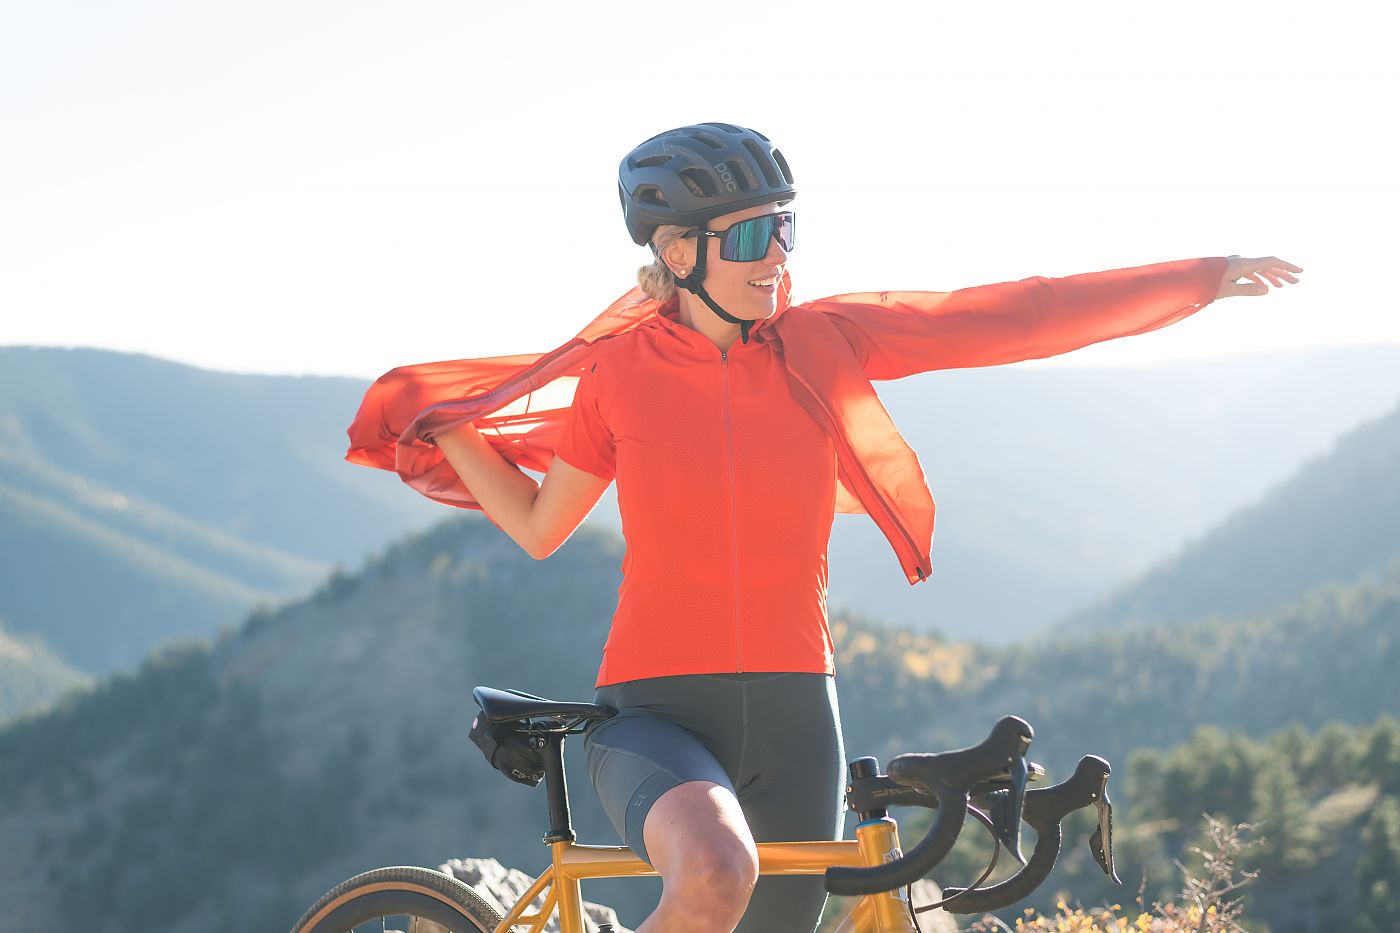 Outdoor apparel brand Rab enters the bike clothing market